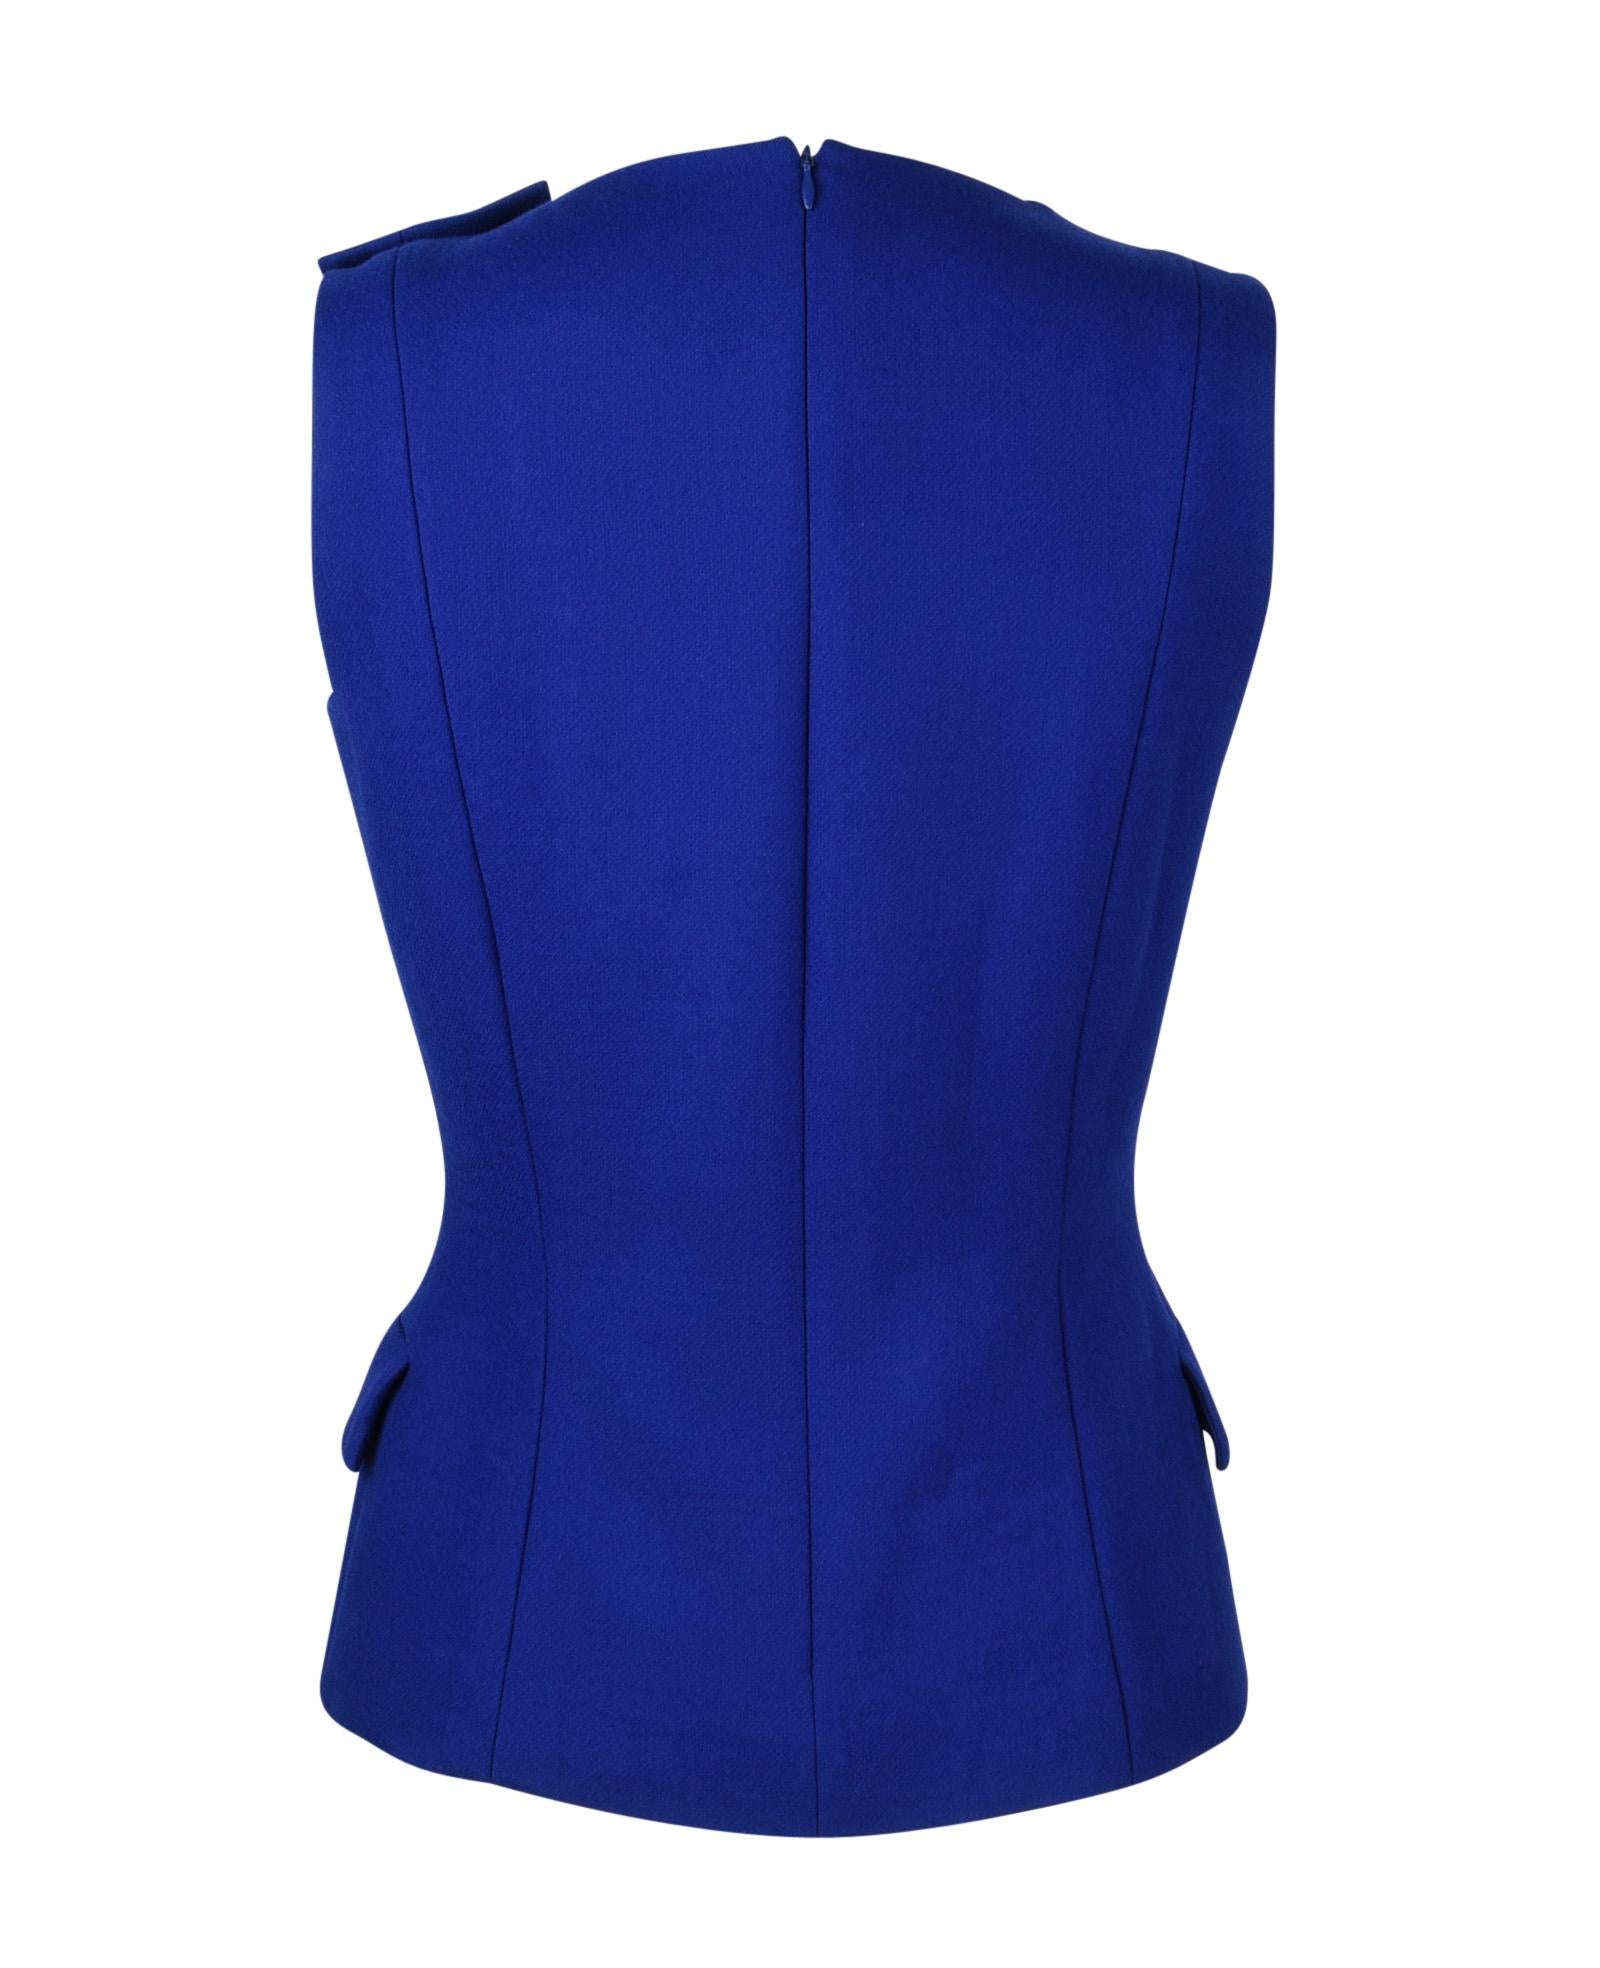 Christian Dior Top Electric Blue Sleeveless Jeweled Shoulder fits 8 1